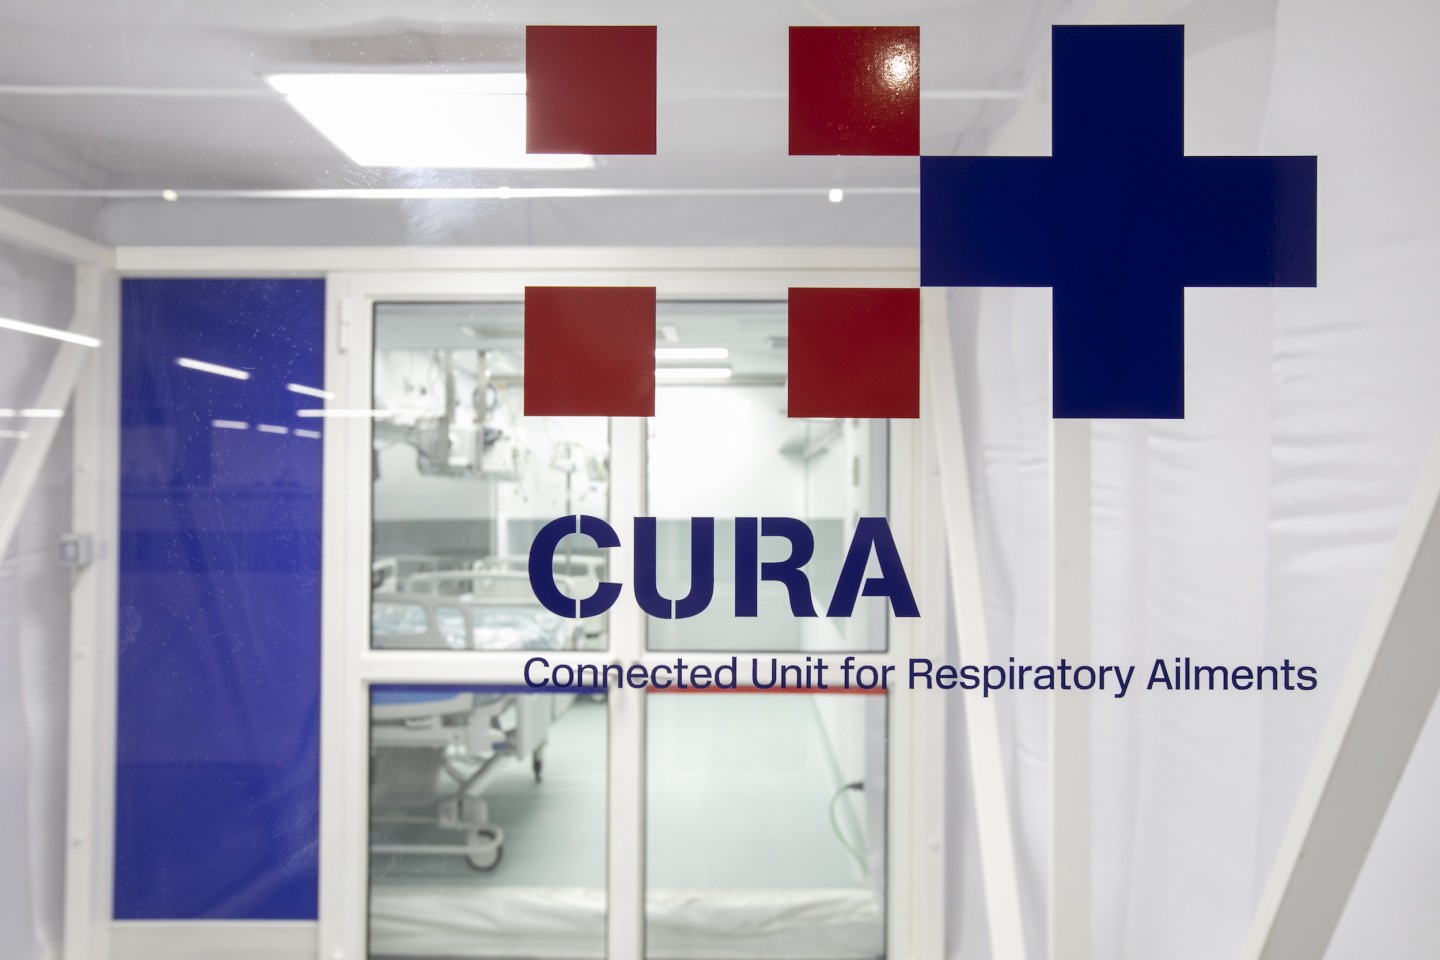 Unlike hospital tents, CURA has negative room pressure, enabling air to flow into it and not out. This helps mitigate the risk of further virus spread